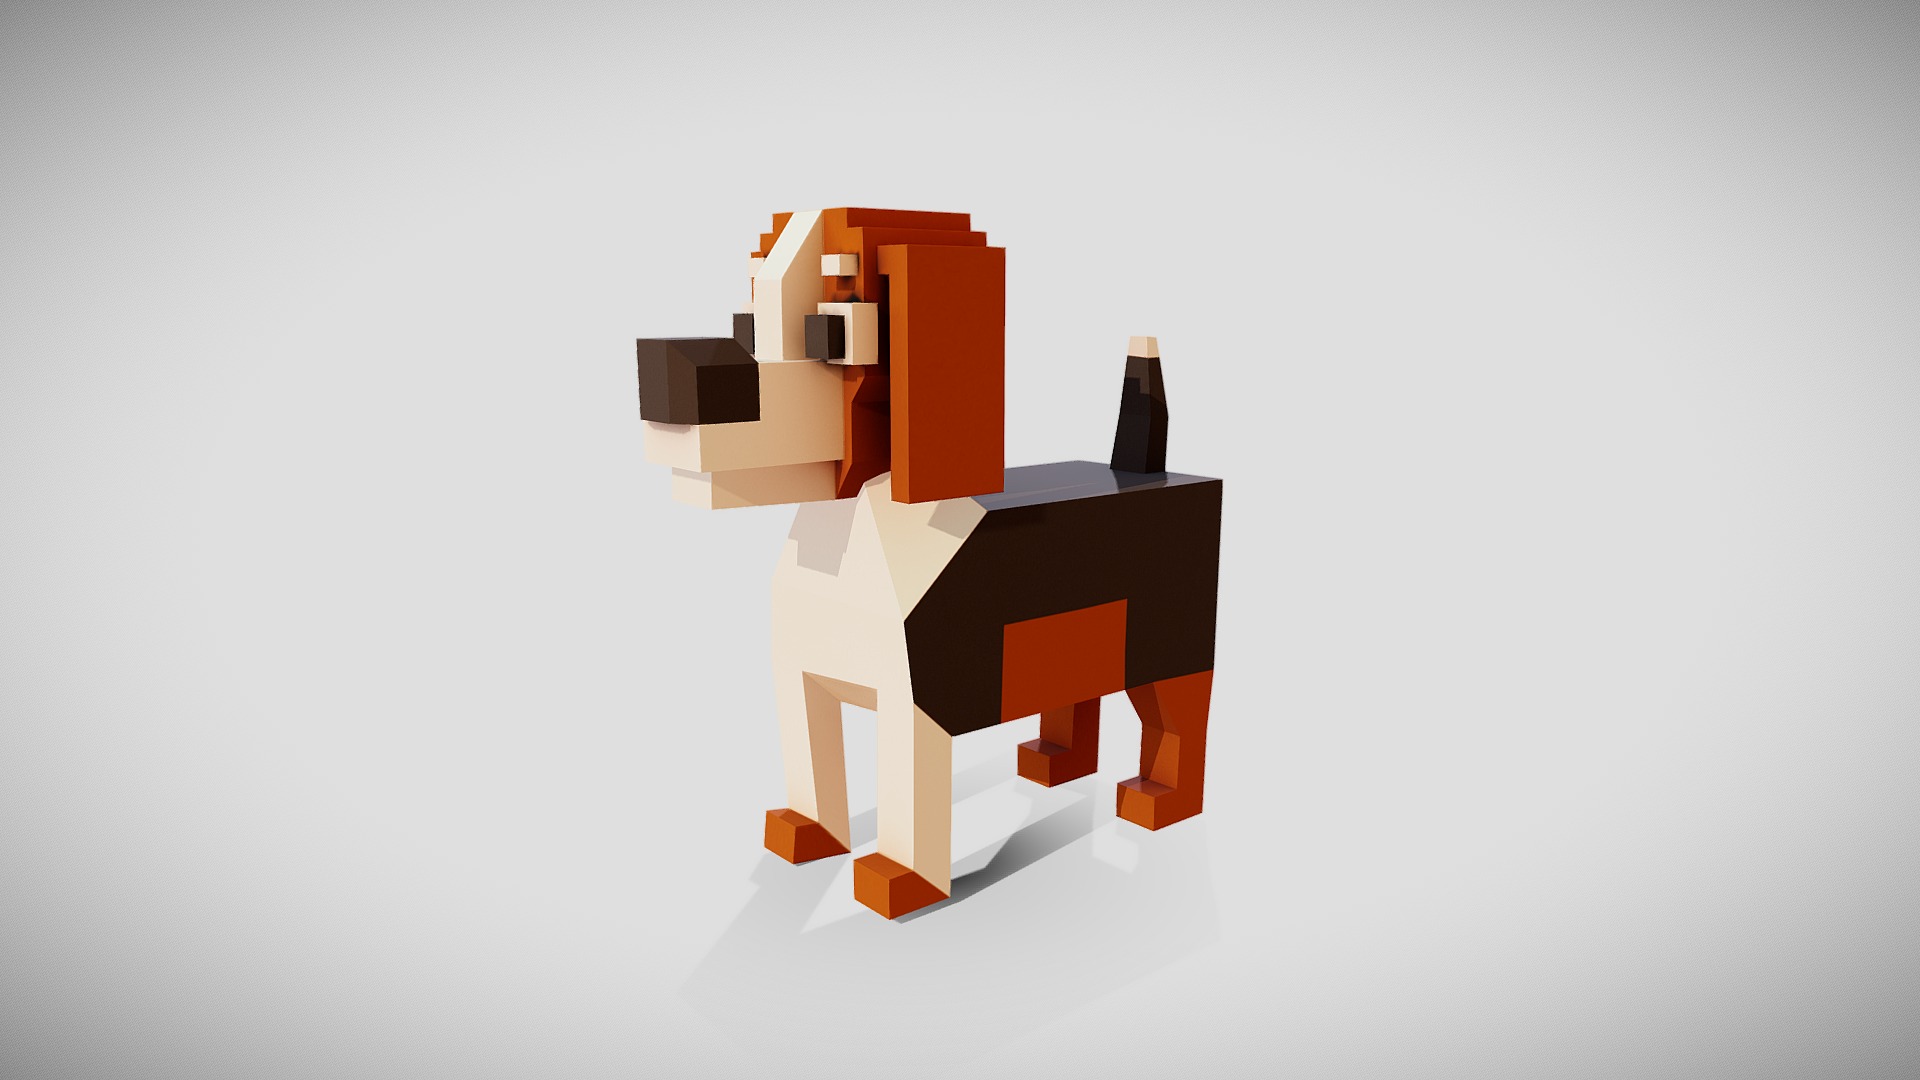 3D model Simple Beagle - This is a 3D model of the Simple Beagle. The 3D model is about a toy building made of building blocks.